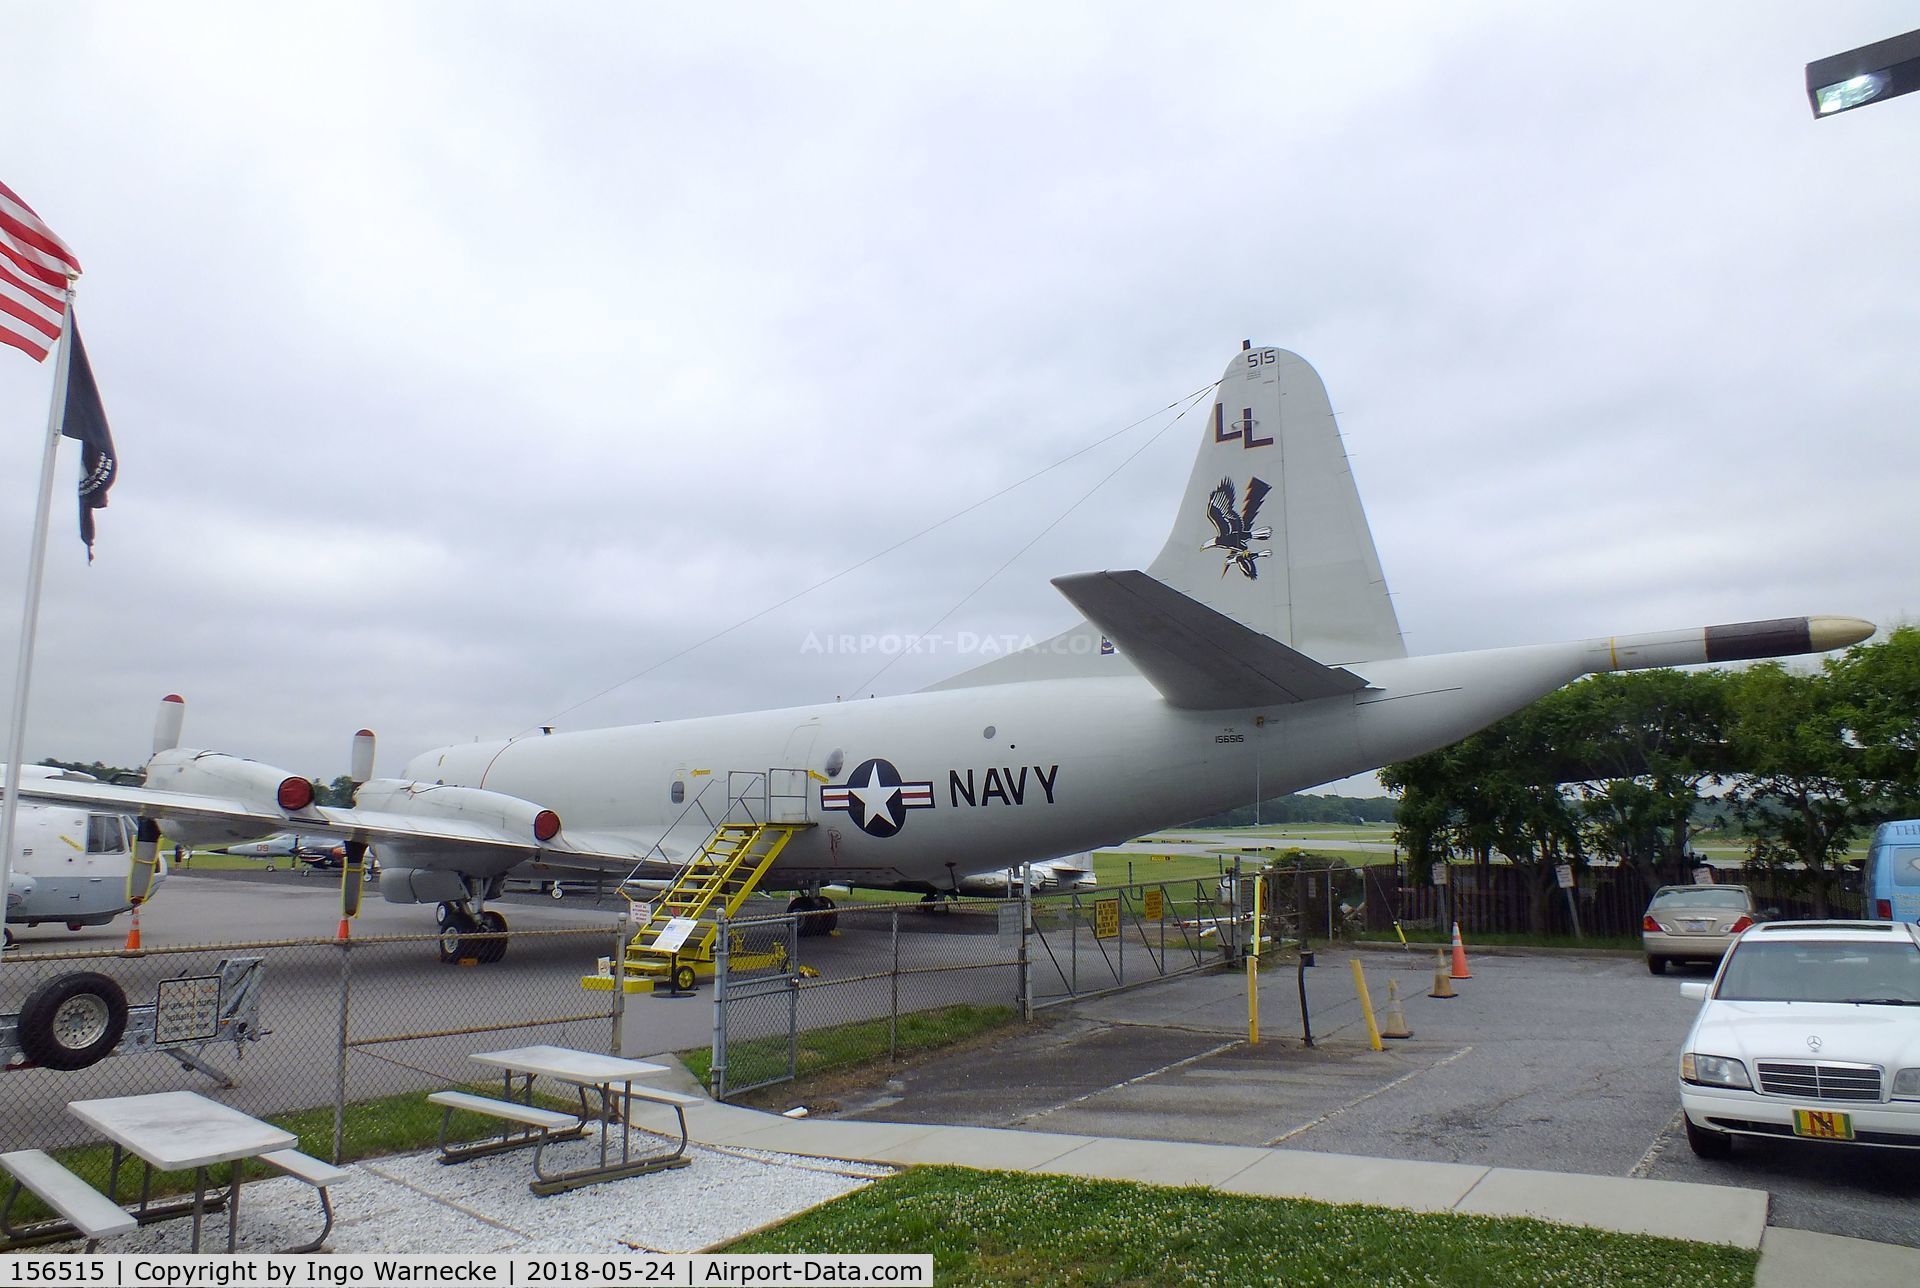 156515, 1969 Lockheed P-3C CDU Orion C/N 285A-5509, Lockheed P-3C Orion at the Hickory Aviation Museum, Hickory NC